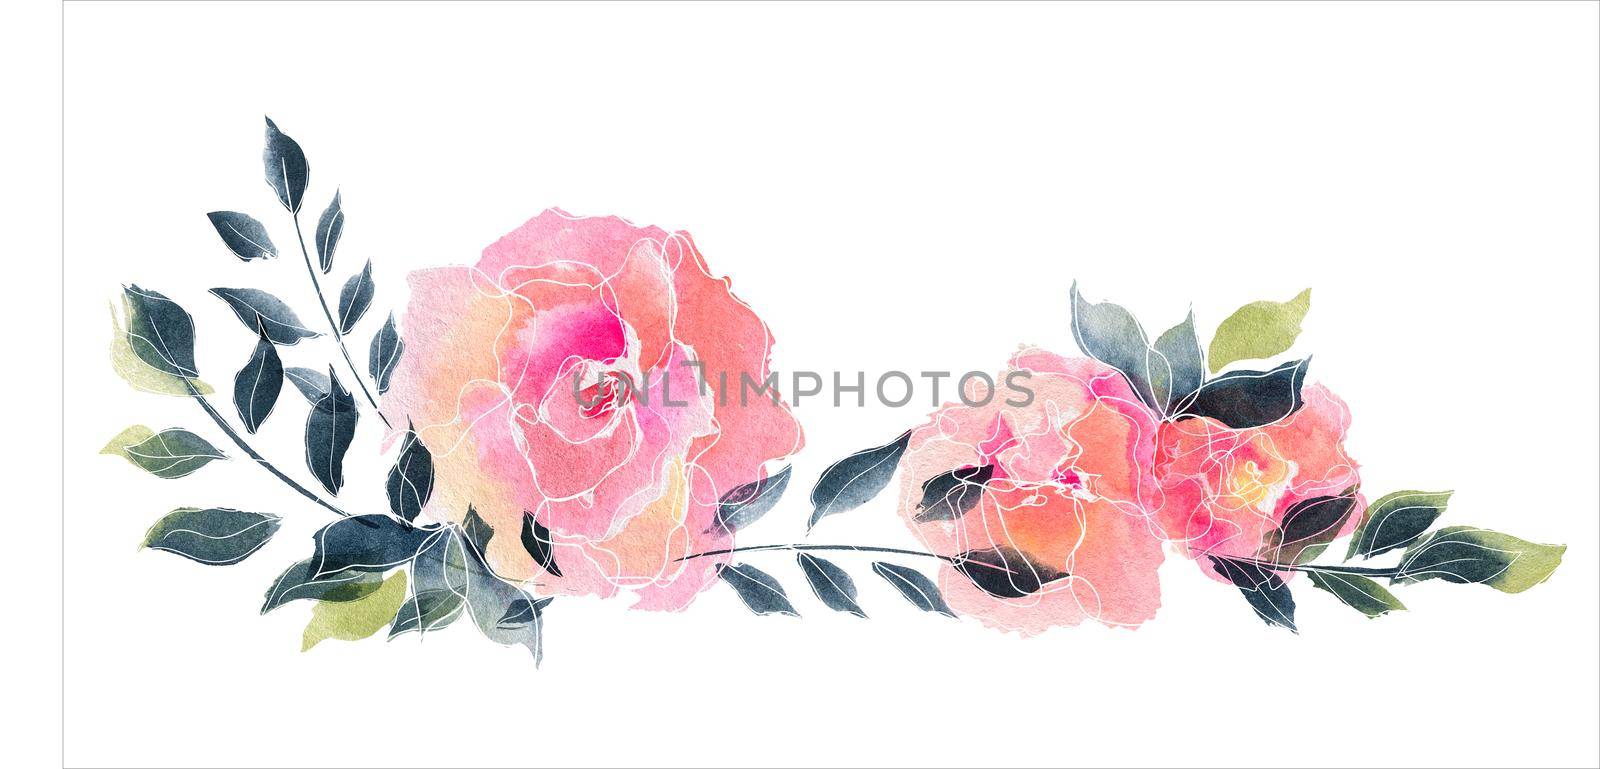 Floral rose garland. Watercolor composition by Xeniasnowstorm